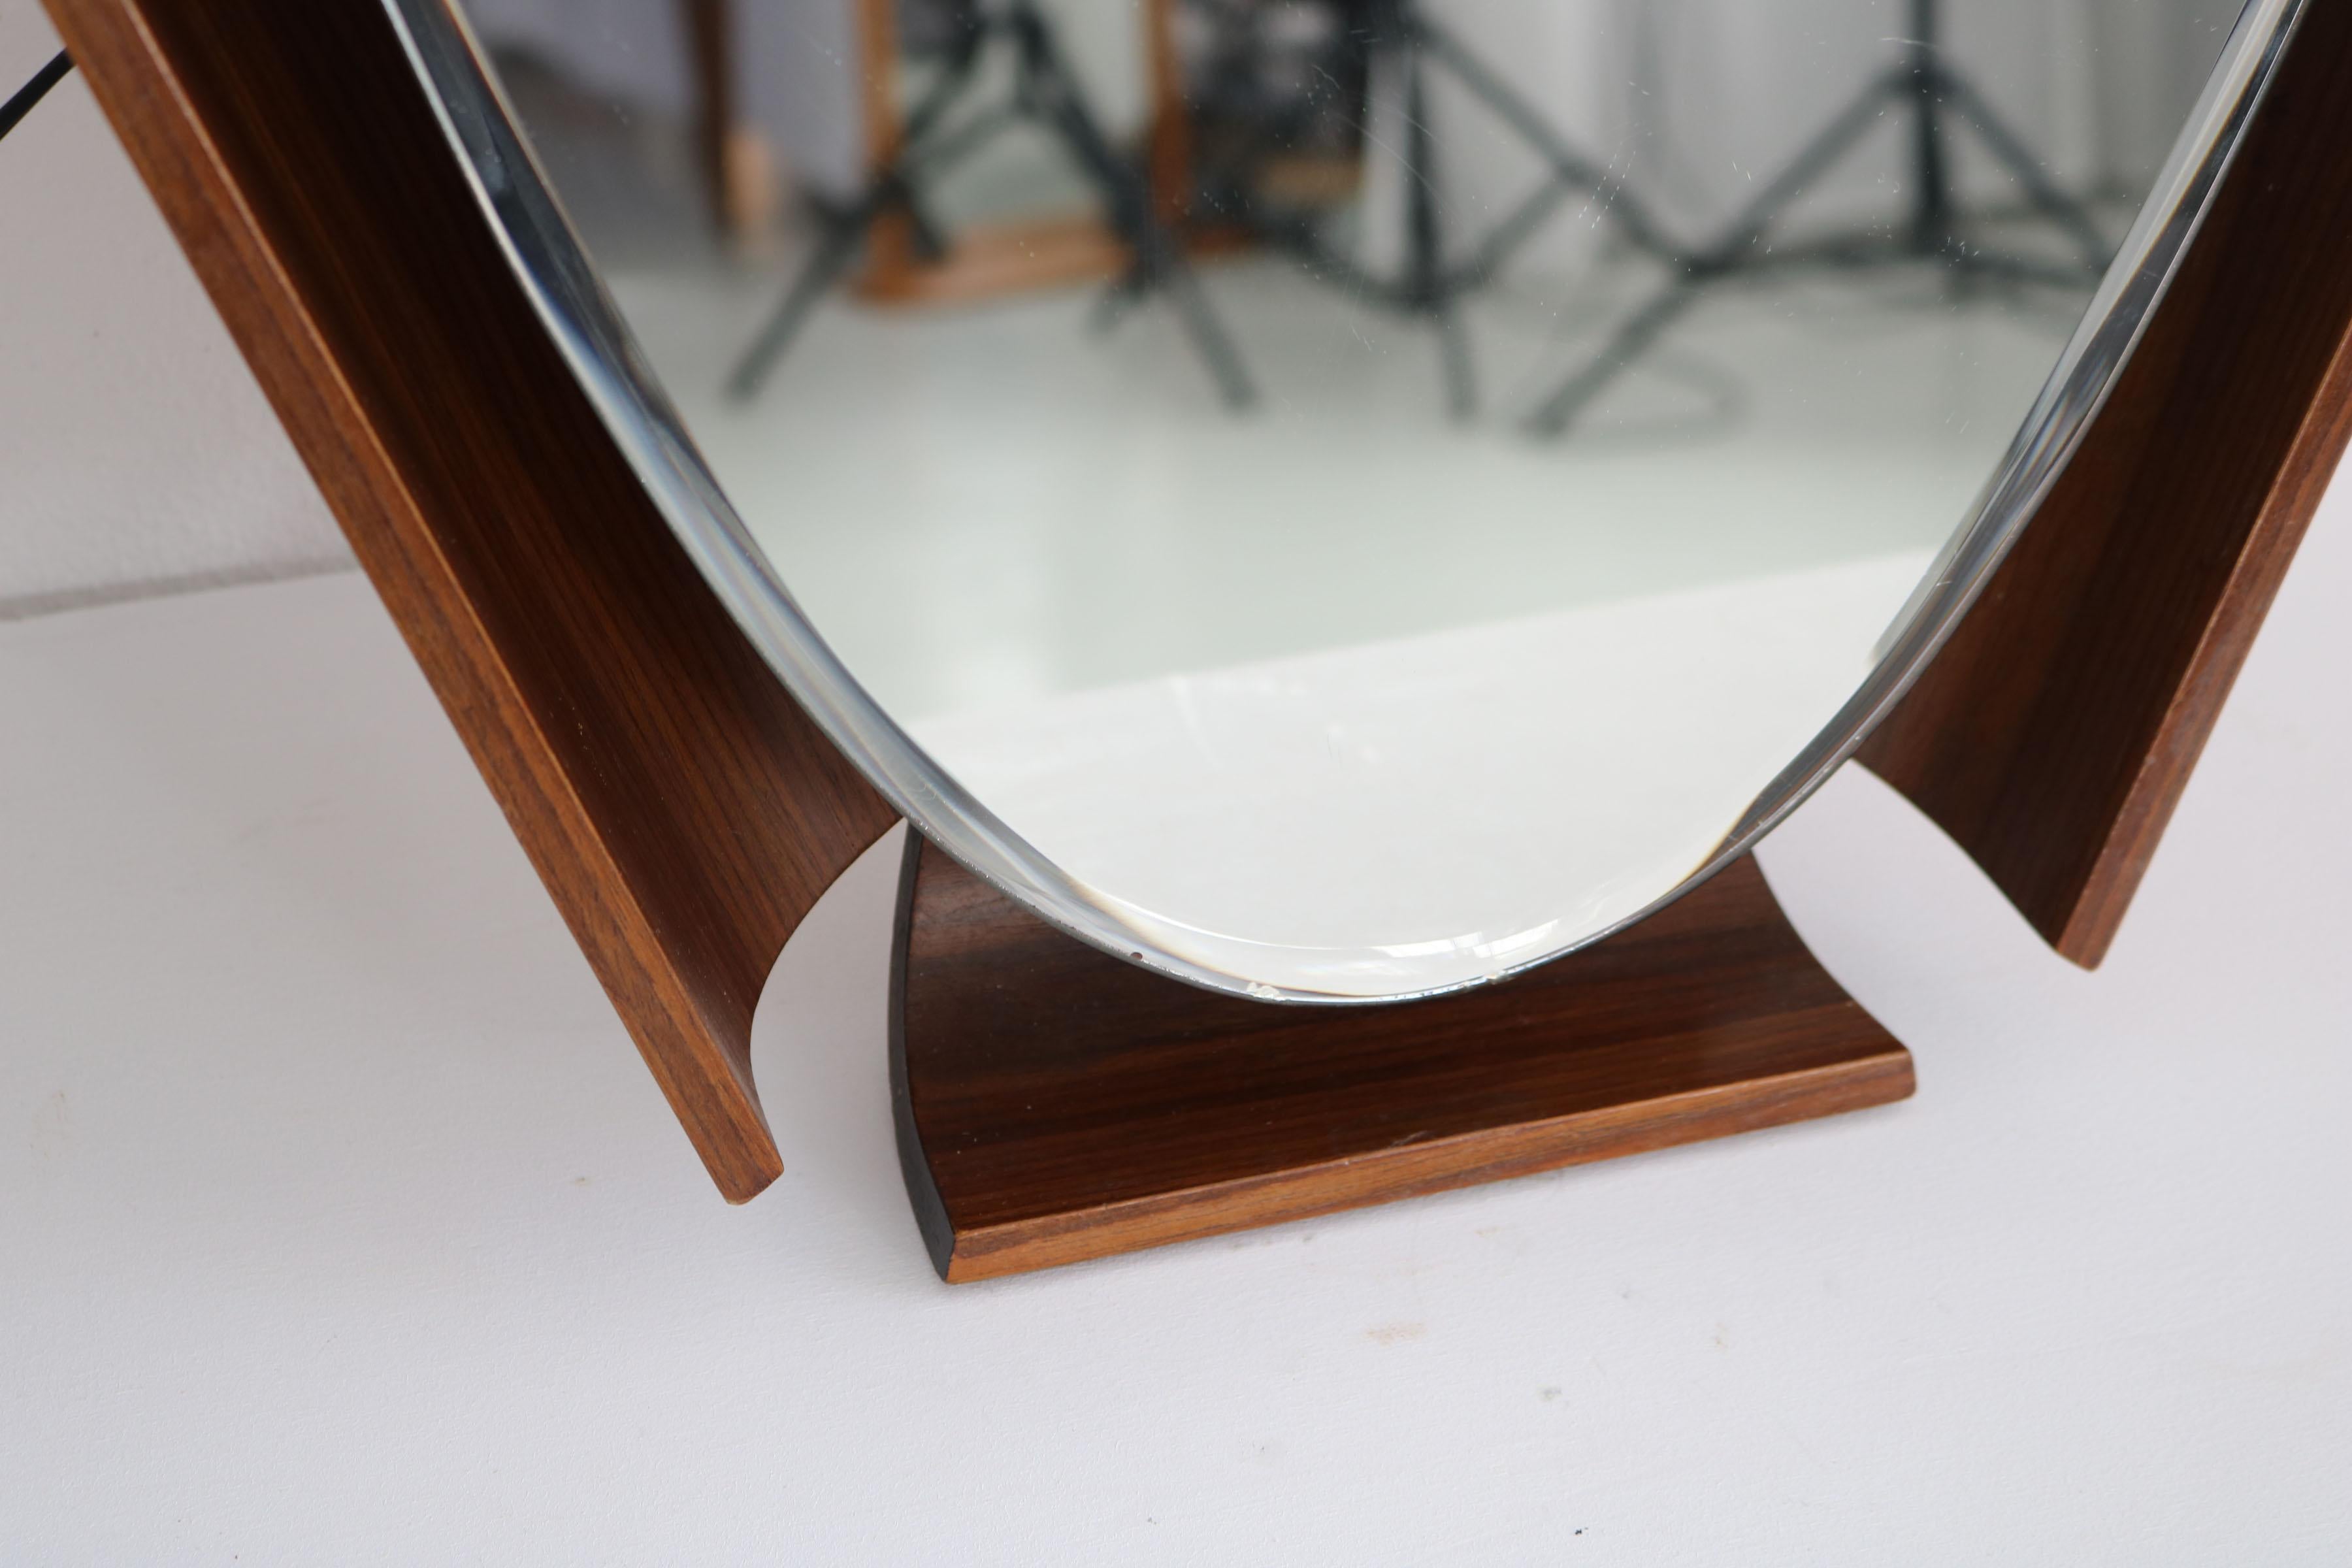 Oval Mirror with Backlight on Curved Teak Plywood Frame, by I.S.A. Bergamo For Sale 3